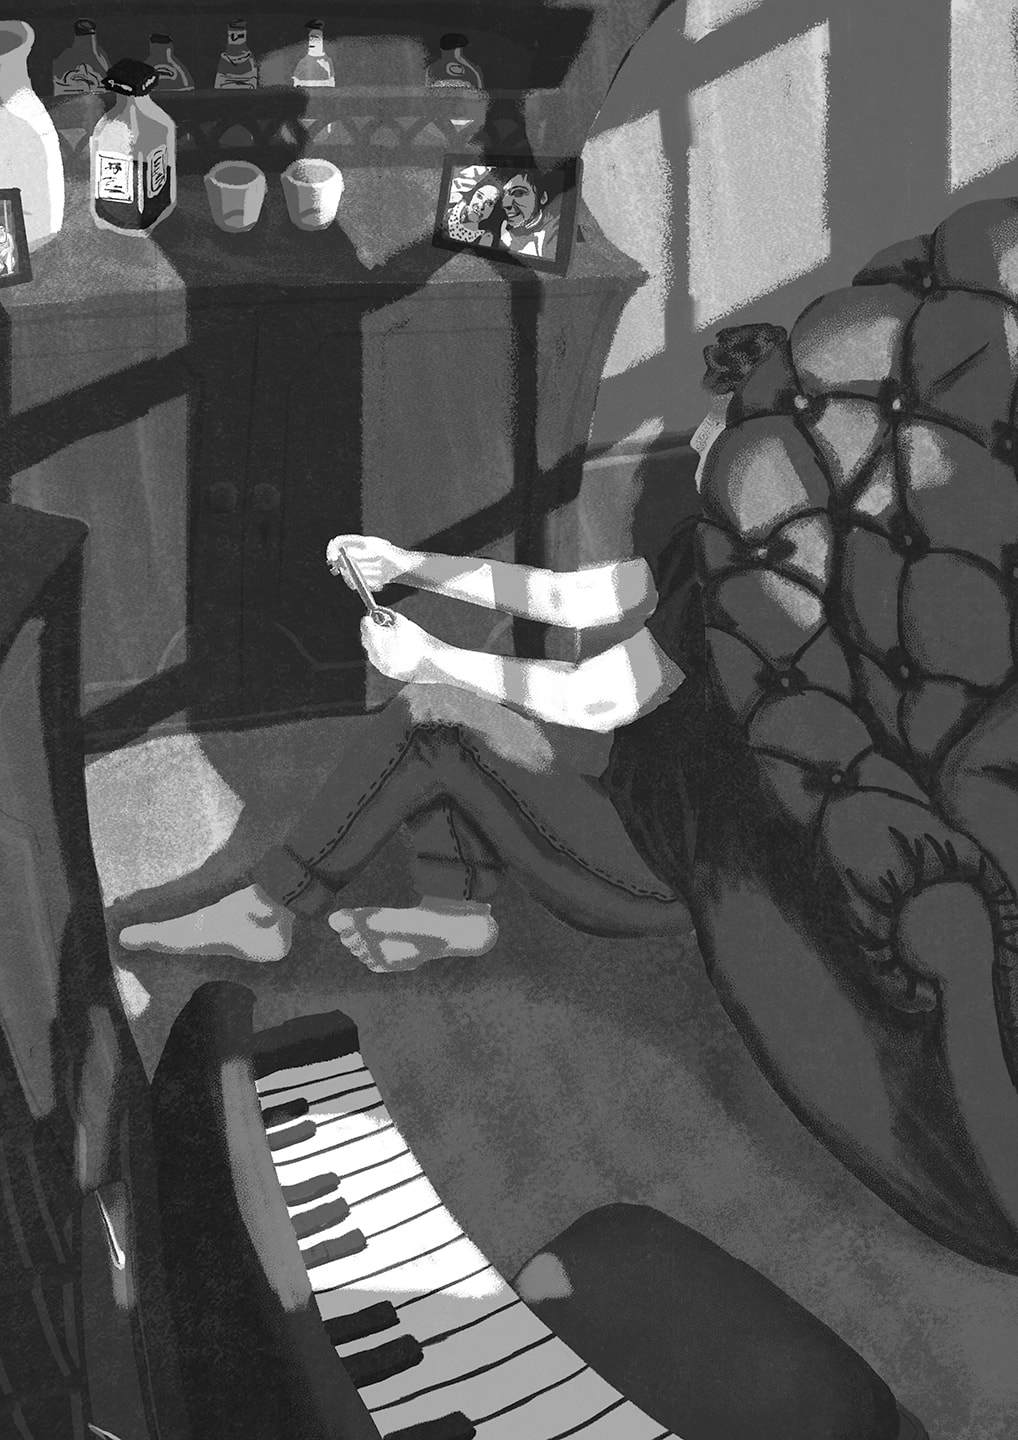 His Place, winner of the Lauren Child Illustration Poetry Prize 2018, a boy ponders over a key in a room dimly lit by sunlight slanting in.